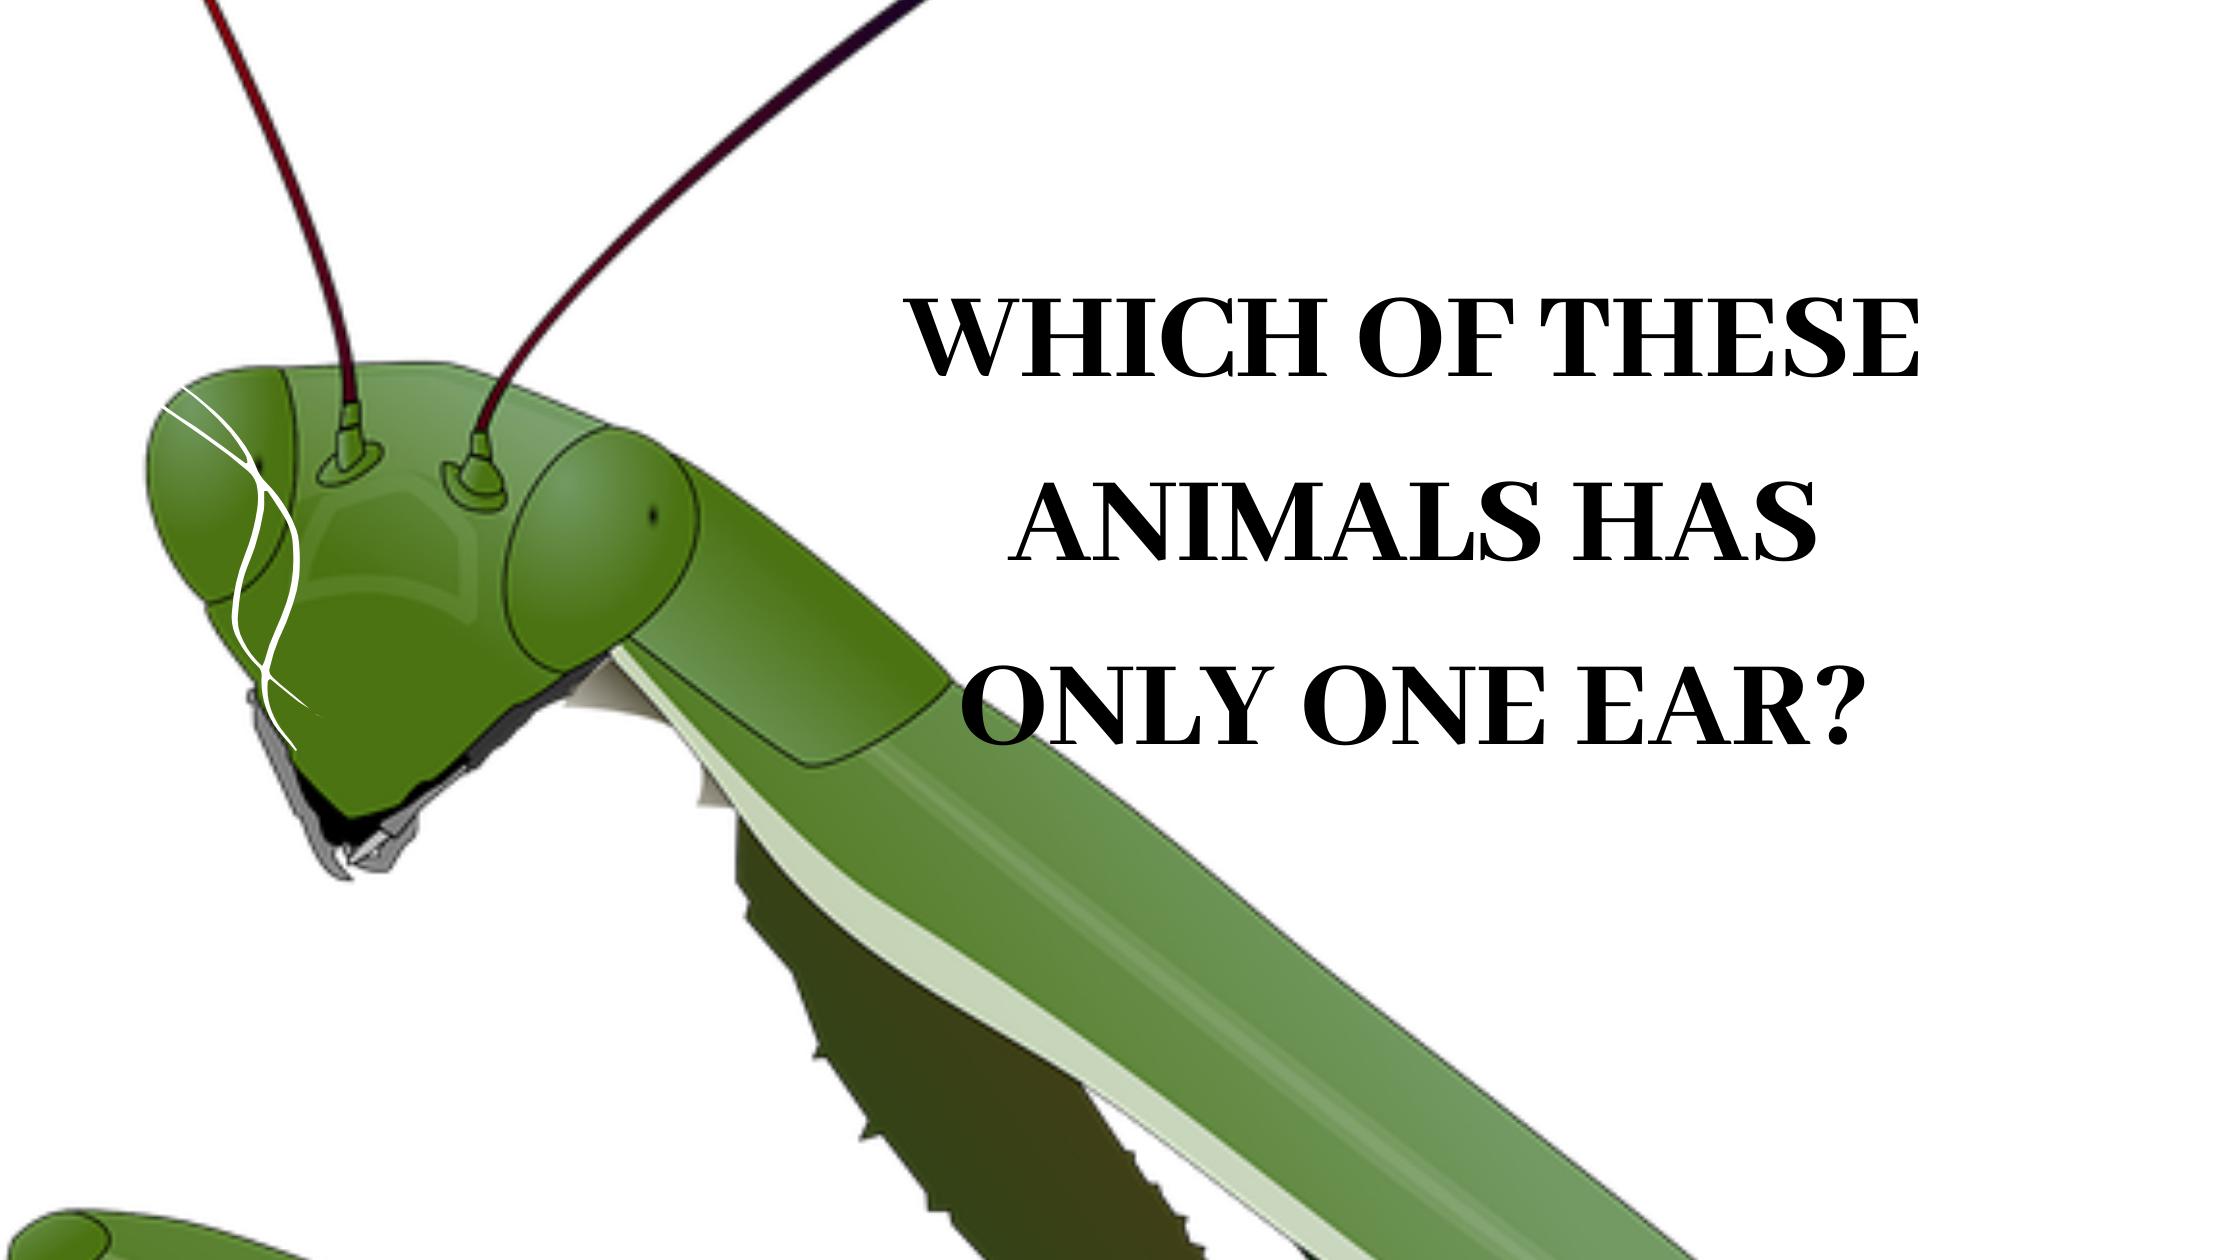 Which of these animals has only one ear?